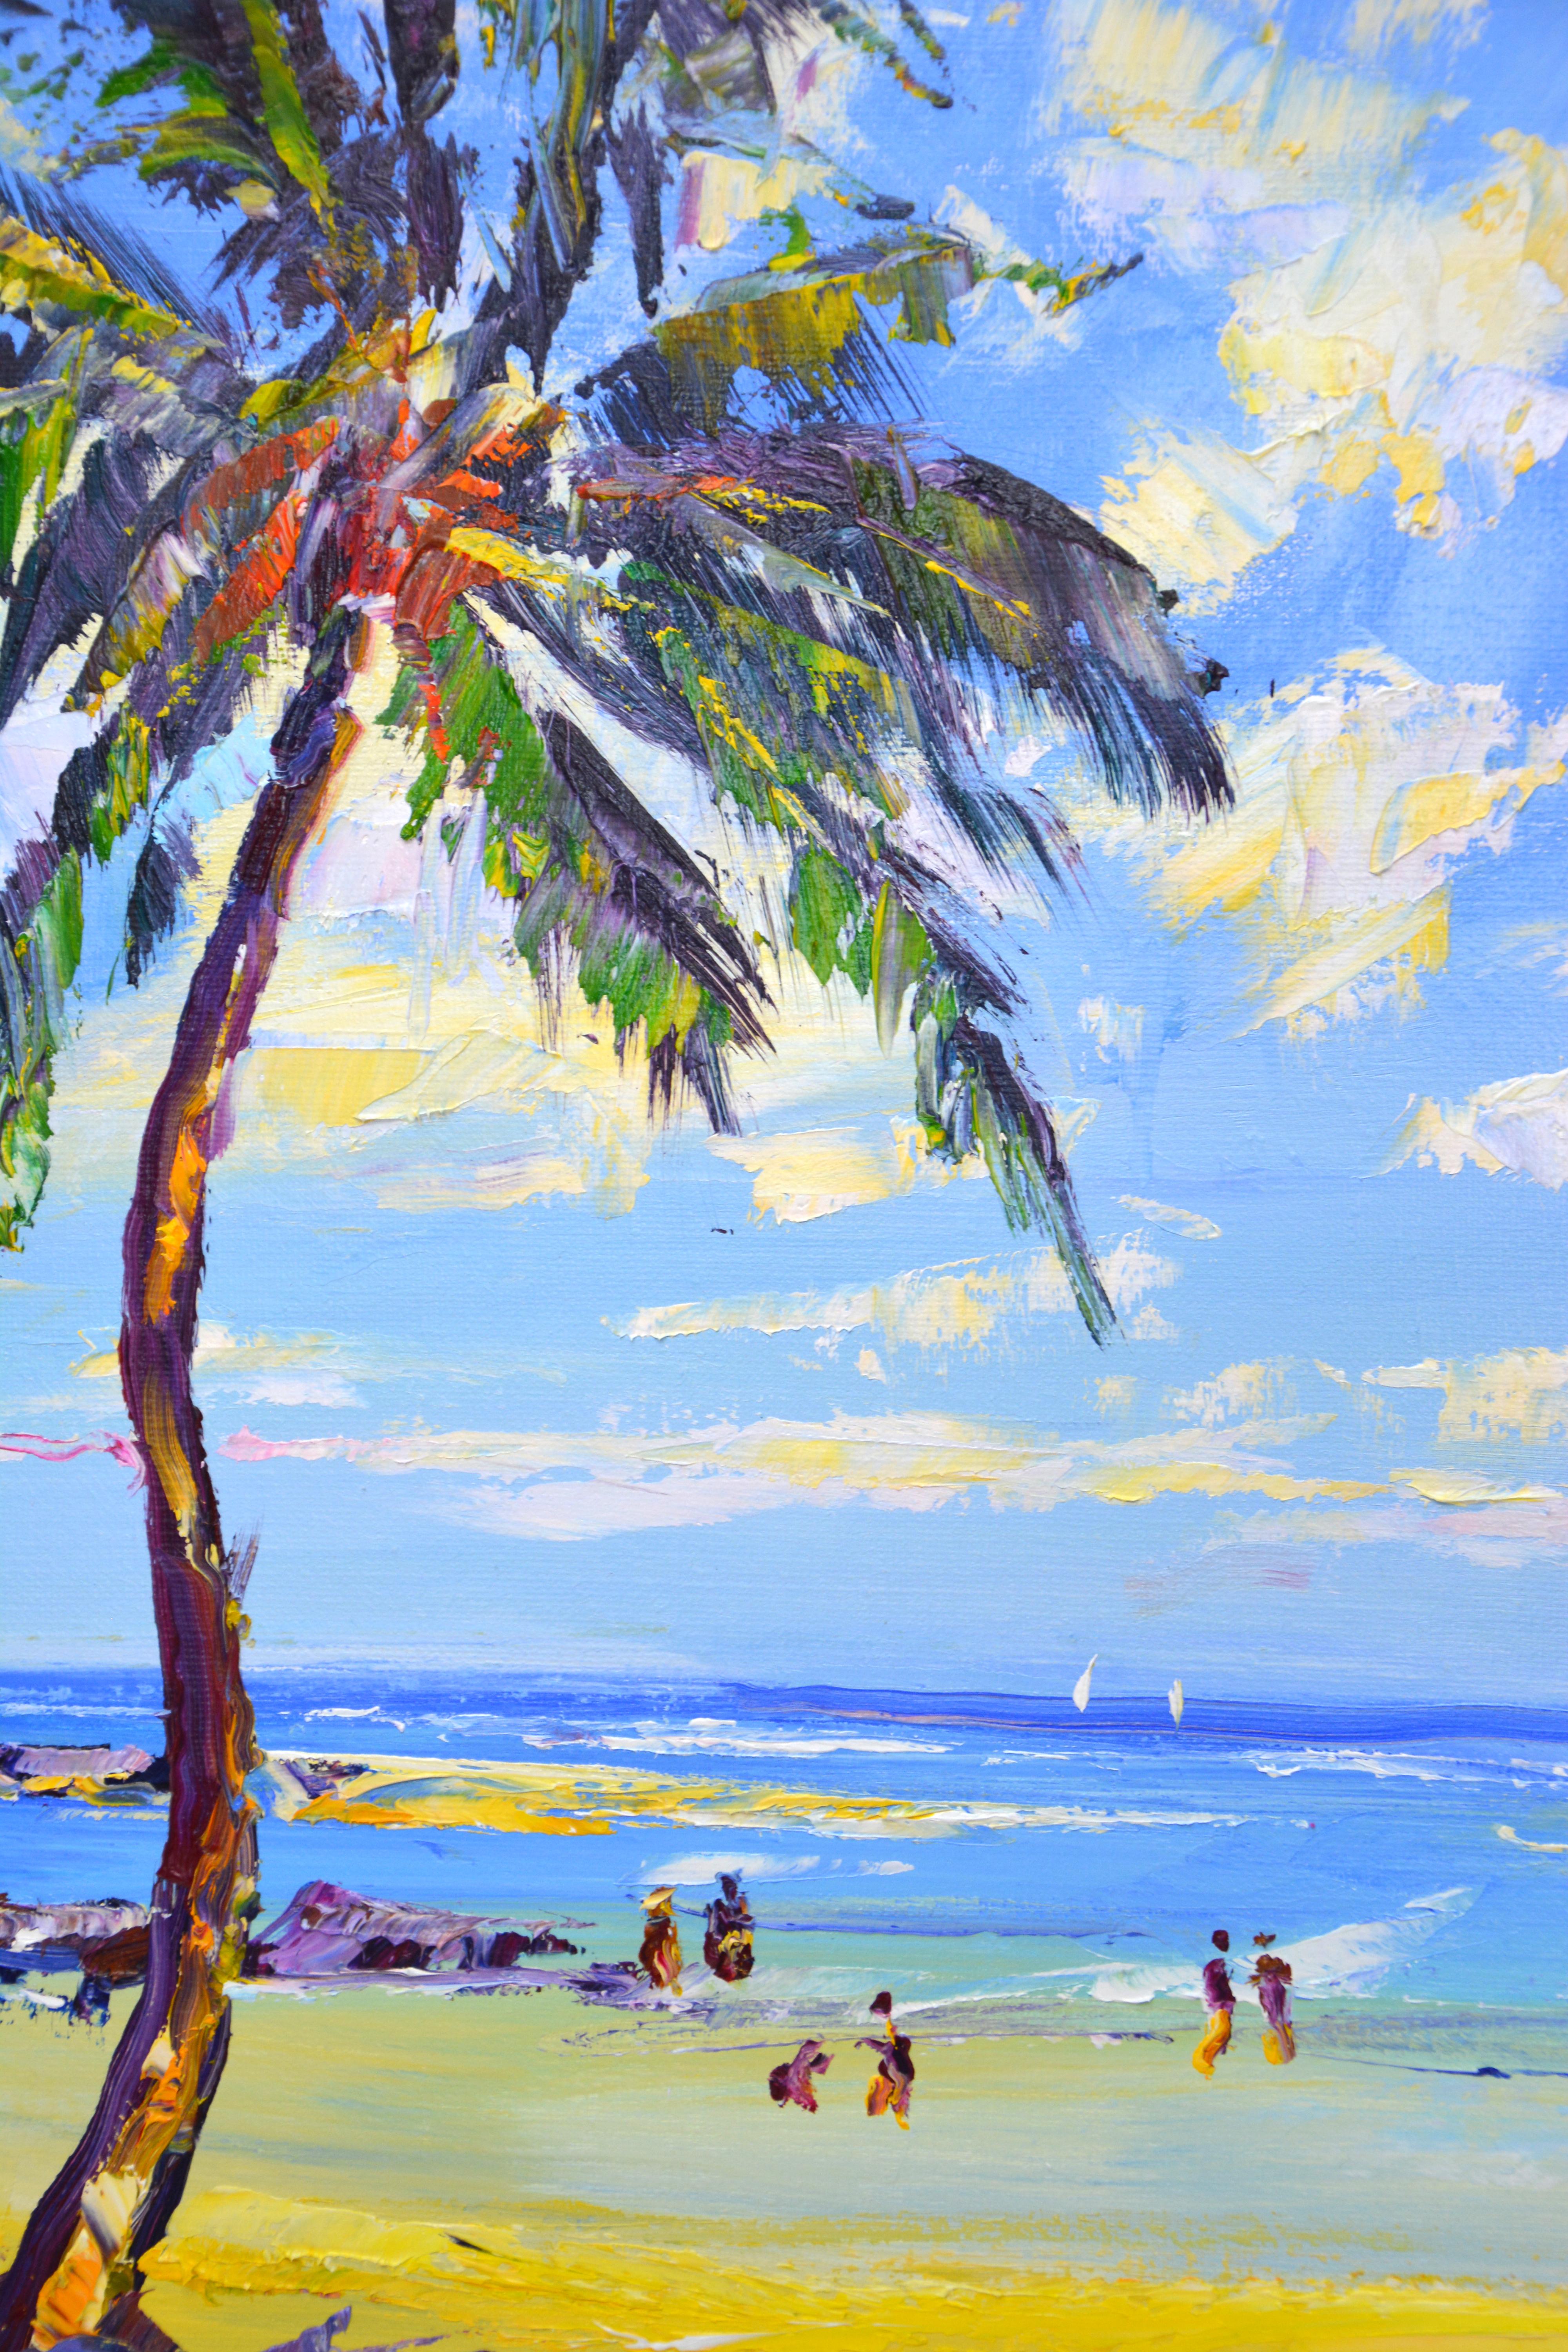 Sunny beach, ocean, beach, sailboats, palm trees, sky, sand, relaxation atmosphere. Saturated. the palette of blue, green, yellow, white emphasizes the energy of the sea. Impressionism. The luminous qualities of the ocean and the amazing sky above